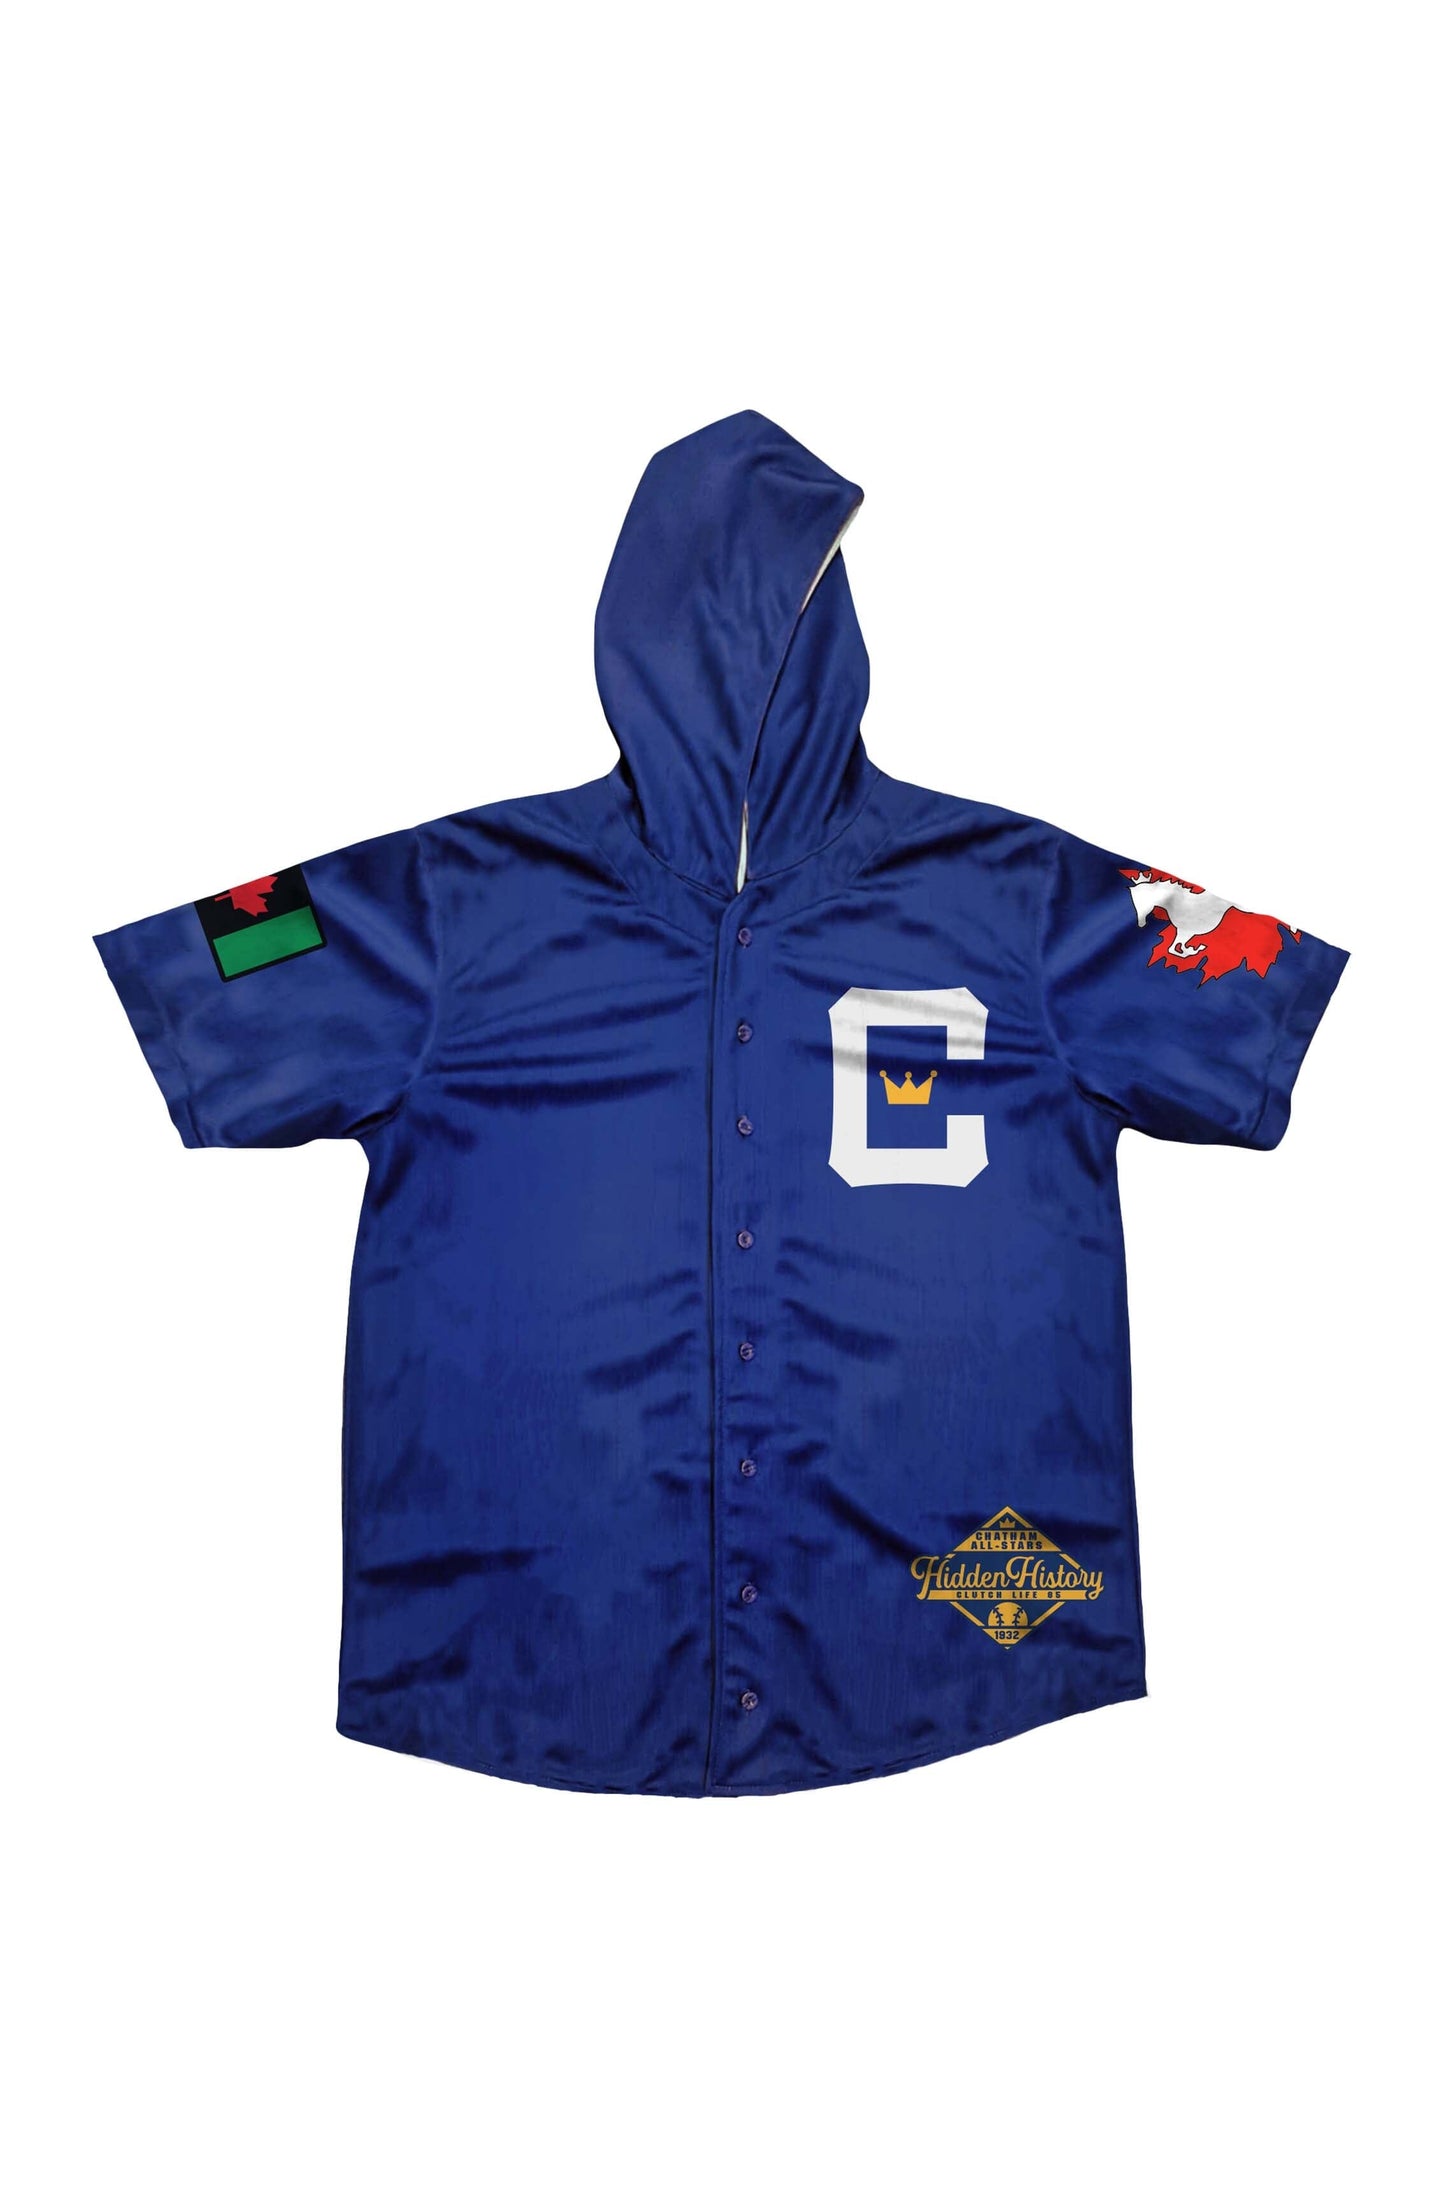 Chatham All Stars Reversible Jersey - Royal Heir